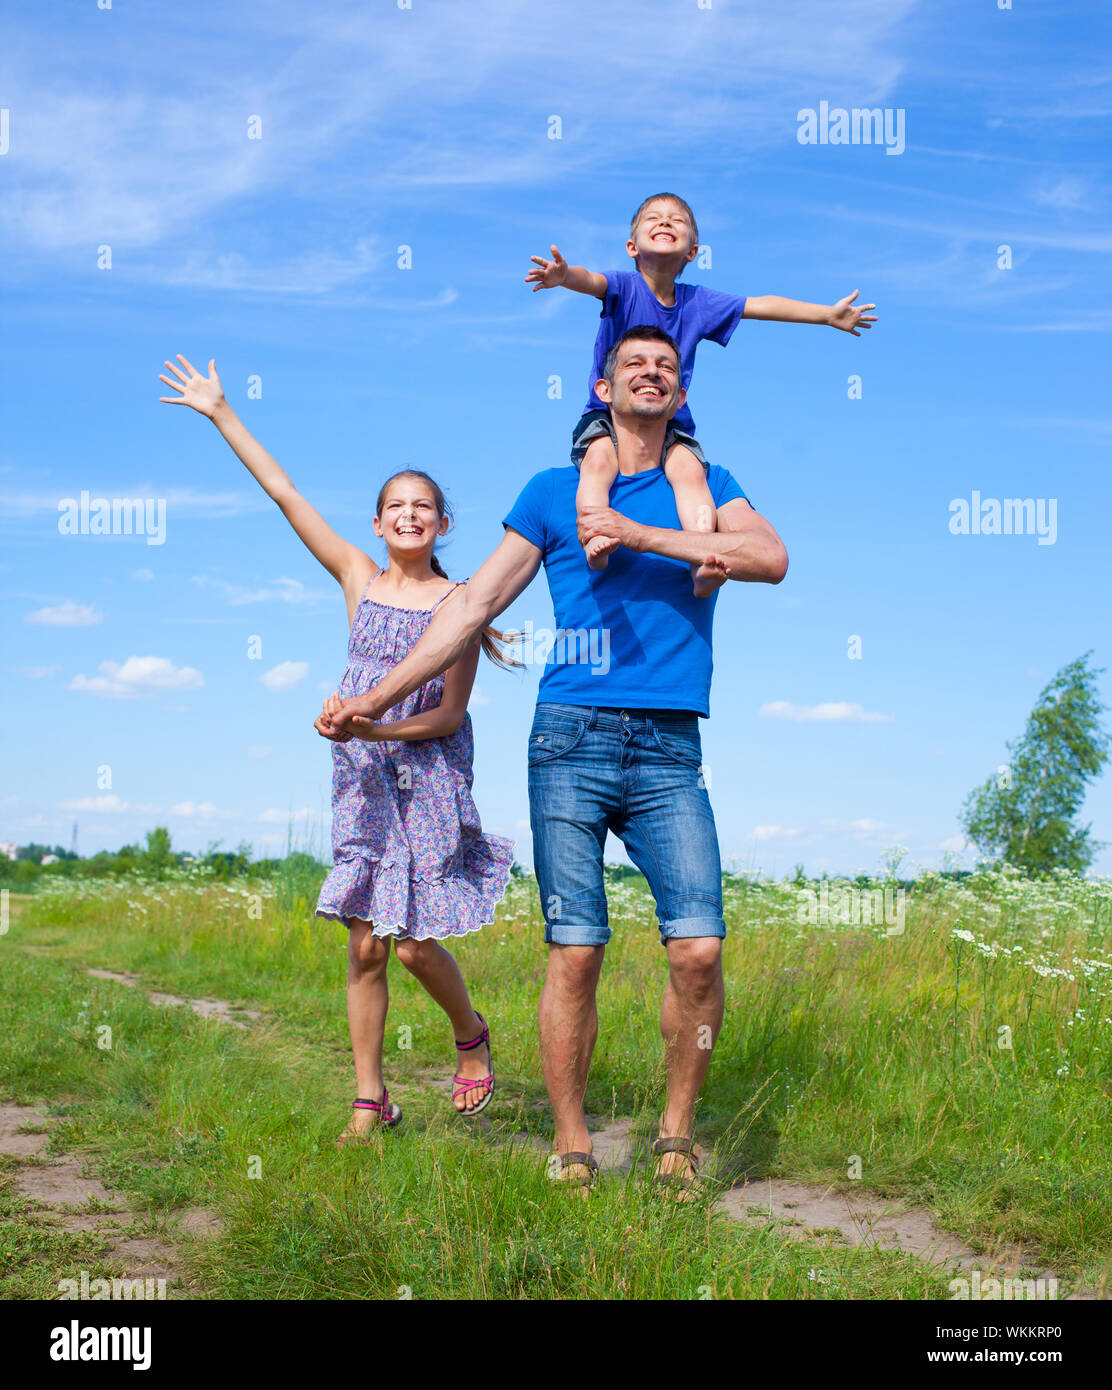 Woman Giving Little Boy Piggyback Ride Stock Photo, Picture and Royalty  Free Image. Image 10112006.